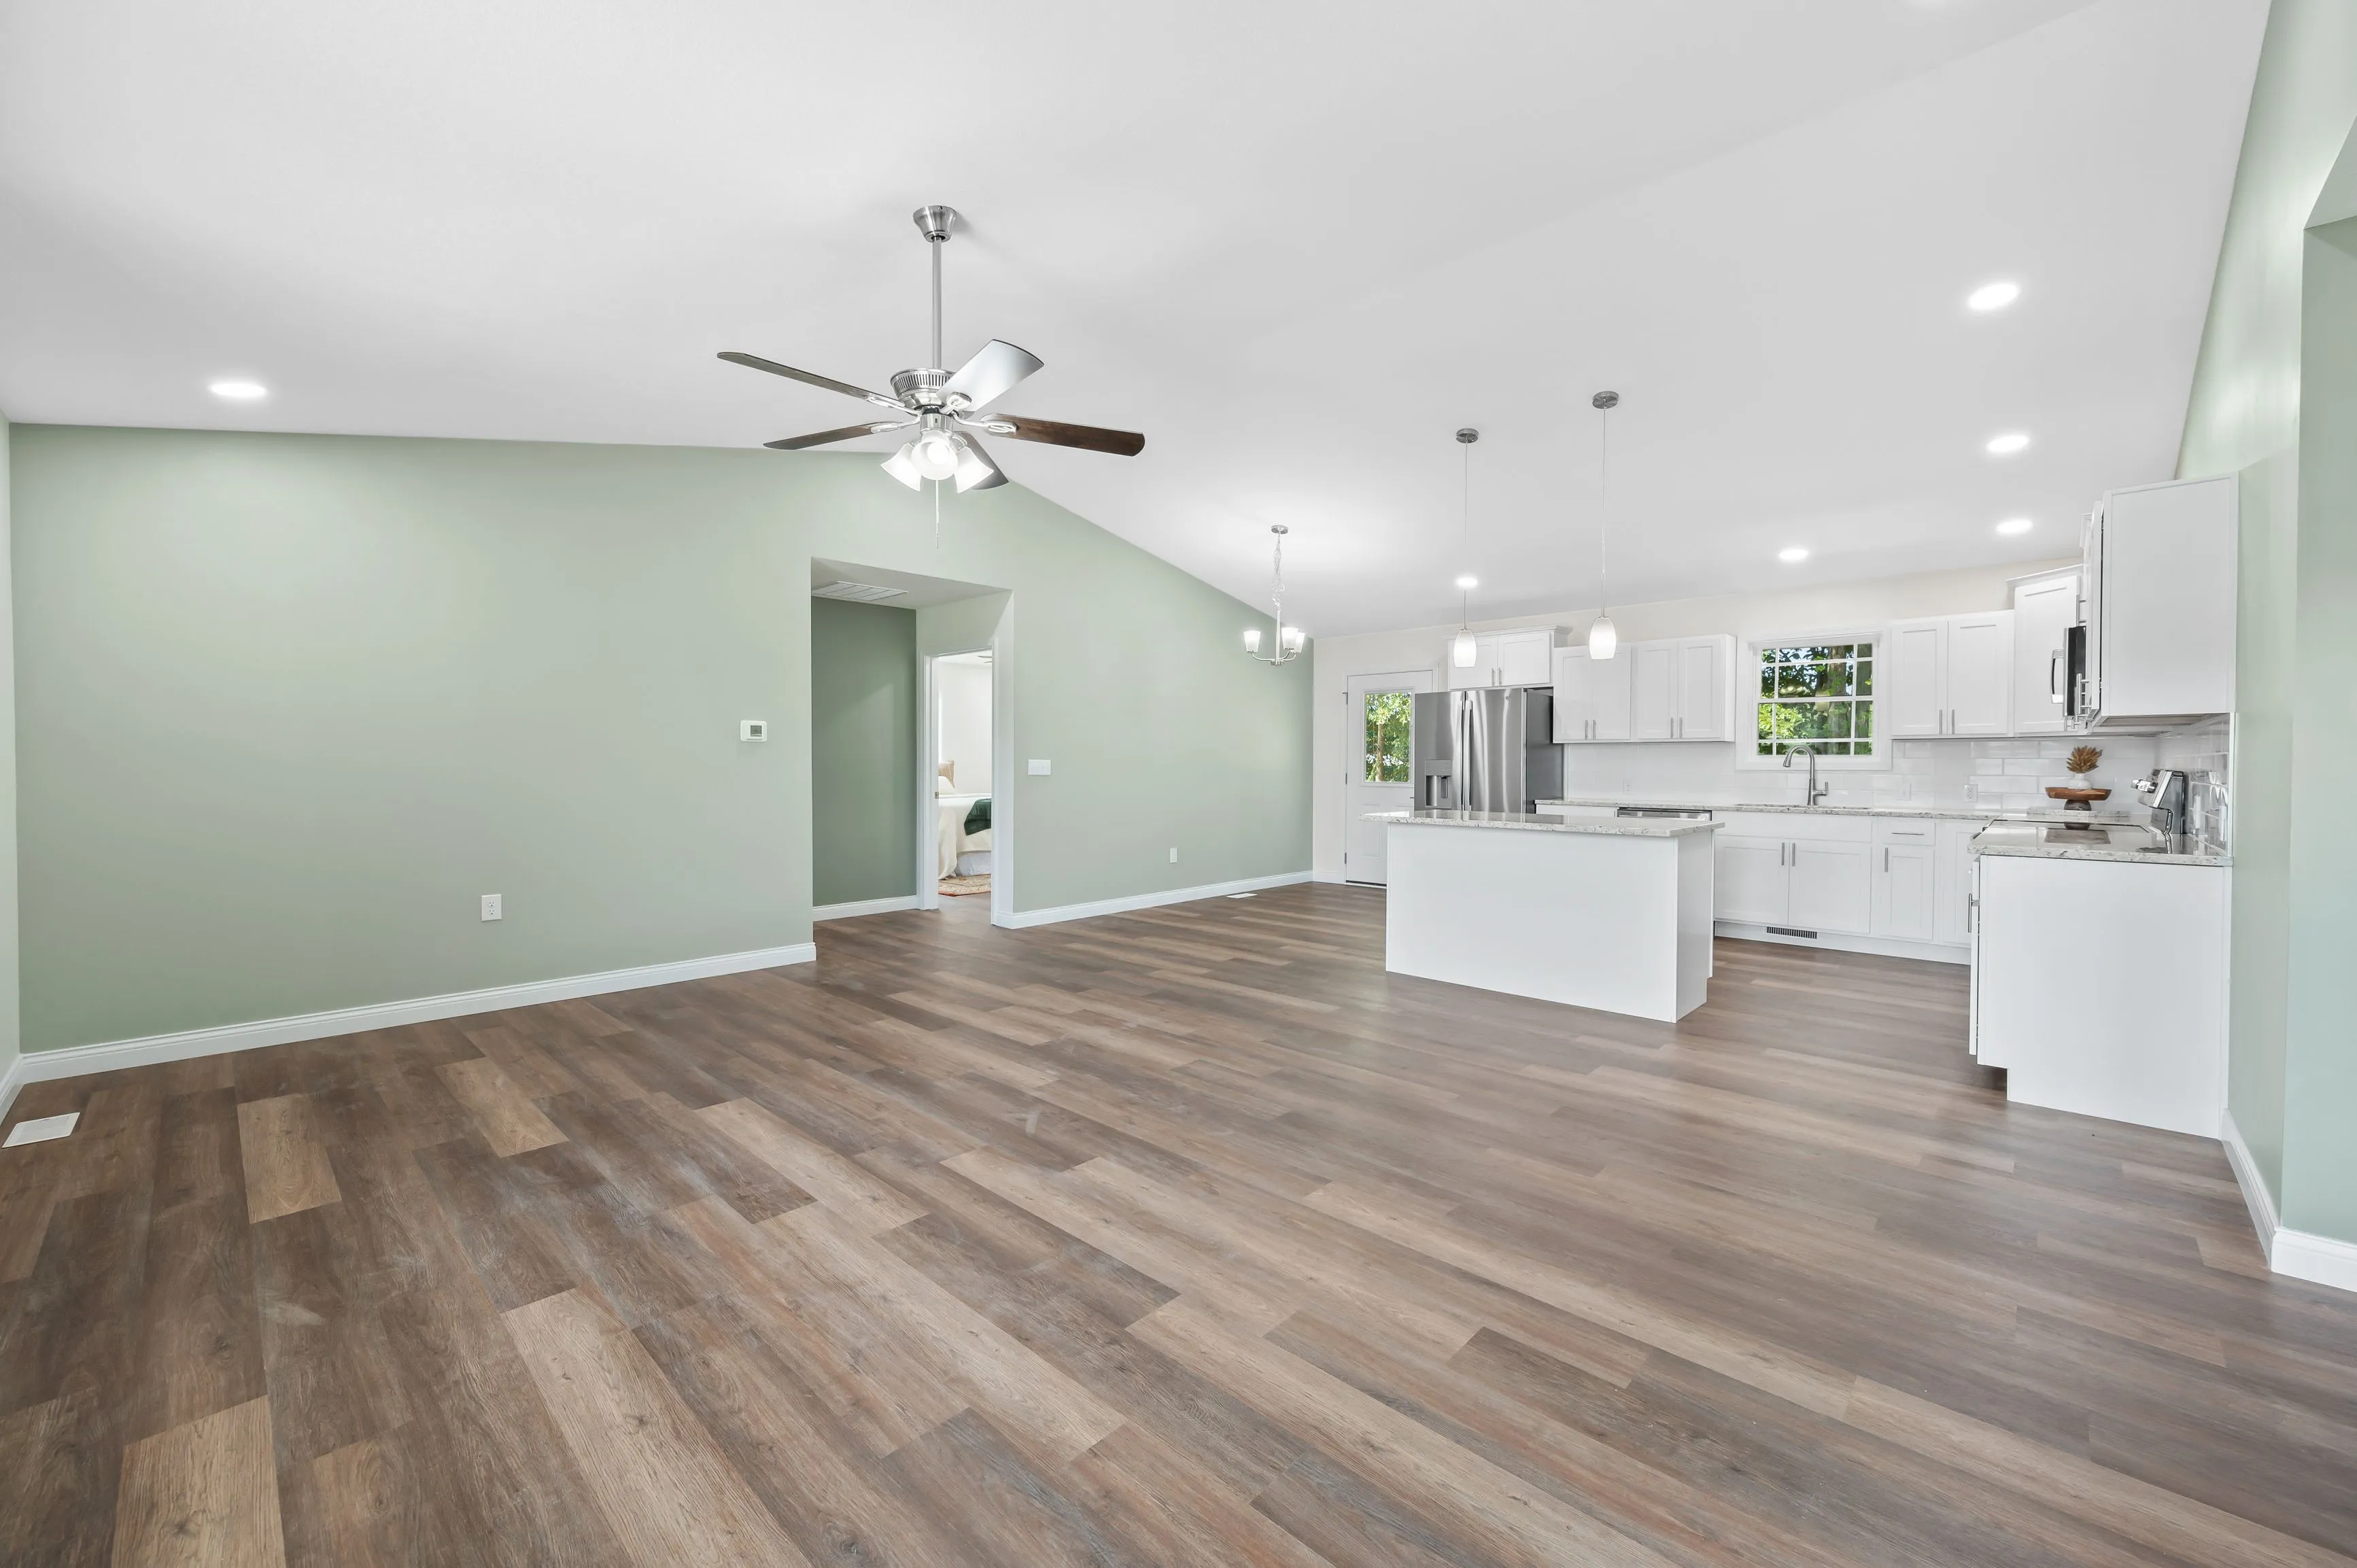 Spacious, modern kitchen with white cabinetry, stainless steel appliances, and a central island, leading into an open-plan living area with hardwood floors and pale green walls.